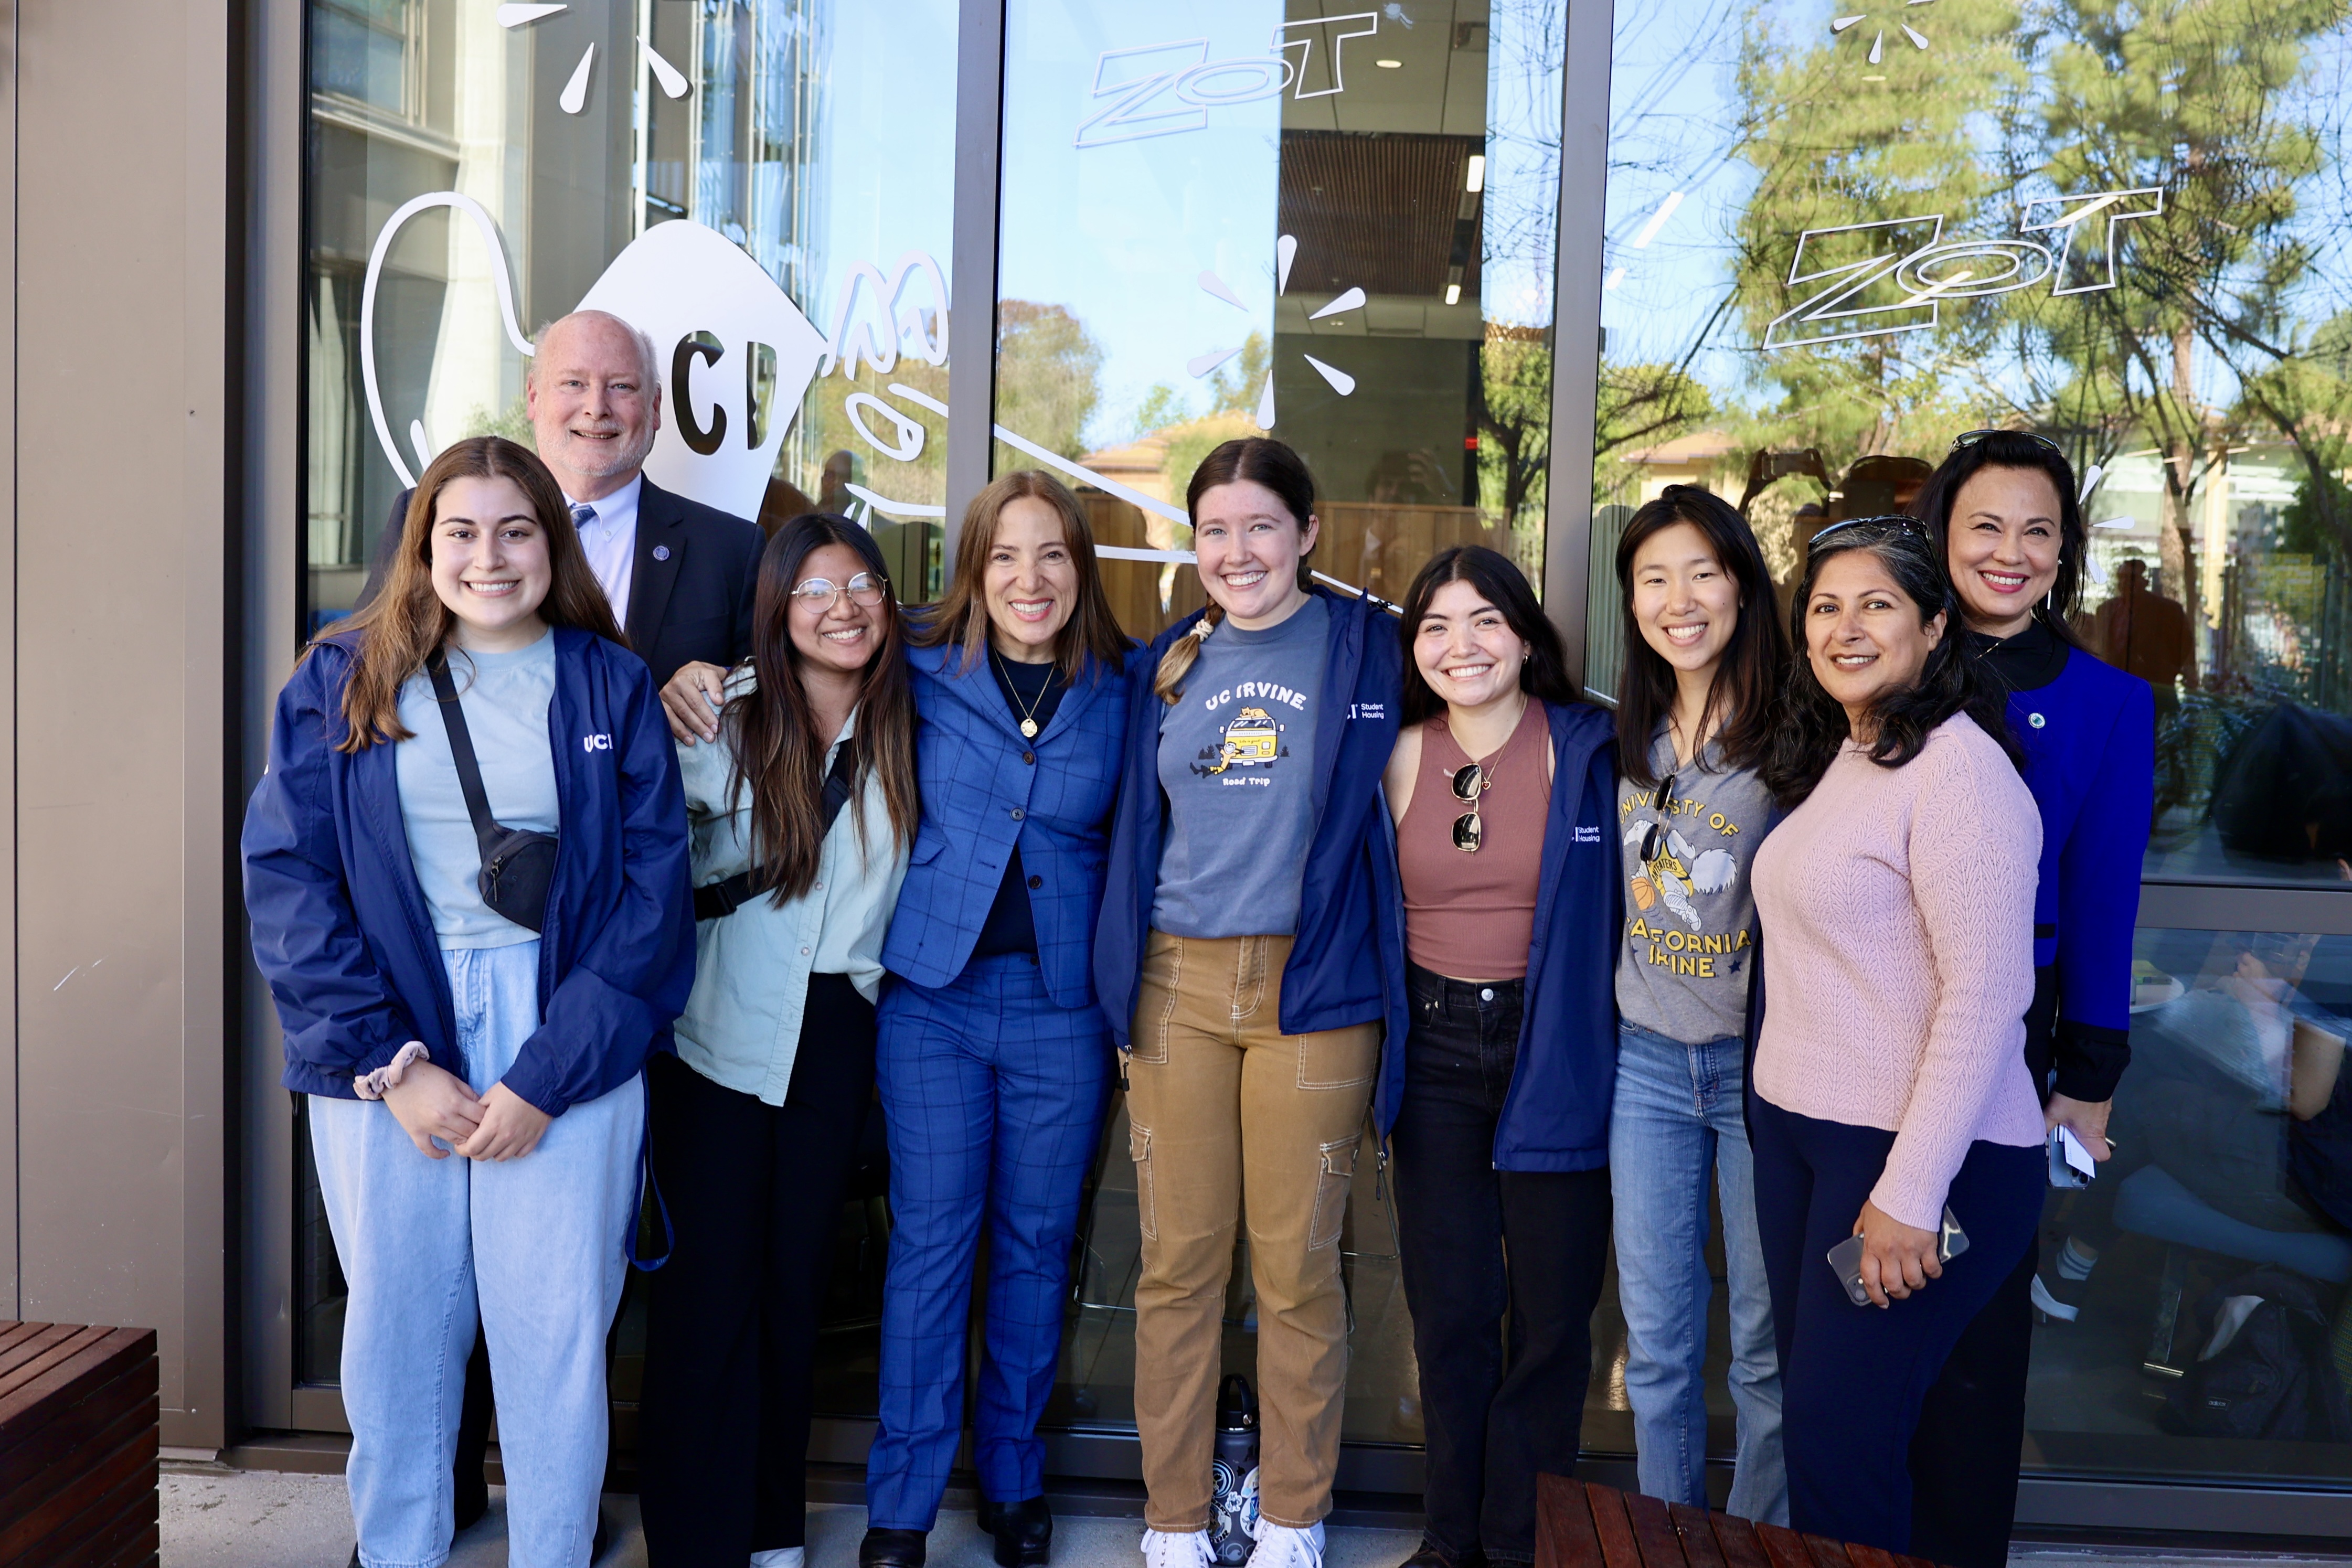 Image of Lt. Governor with students at UC Irvine